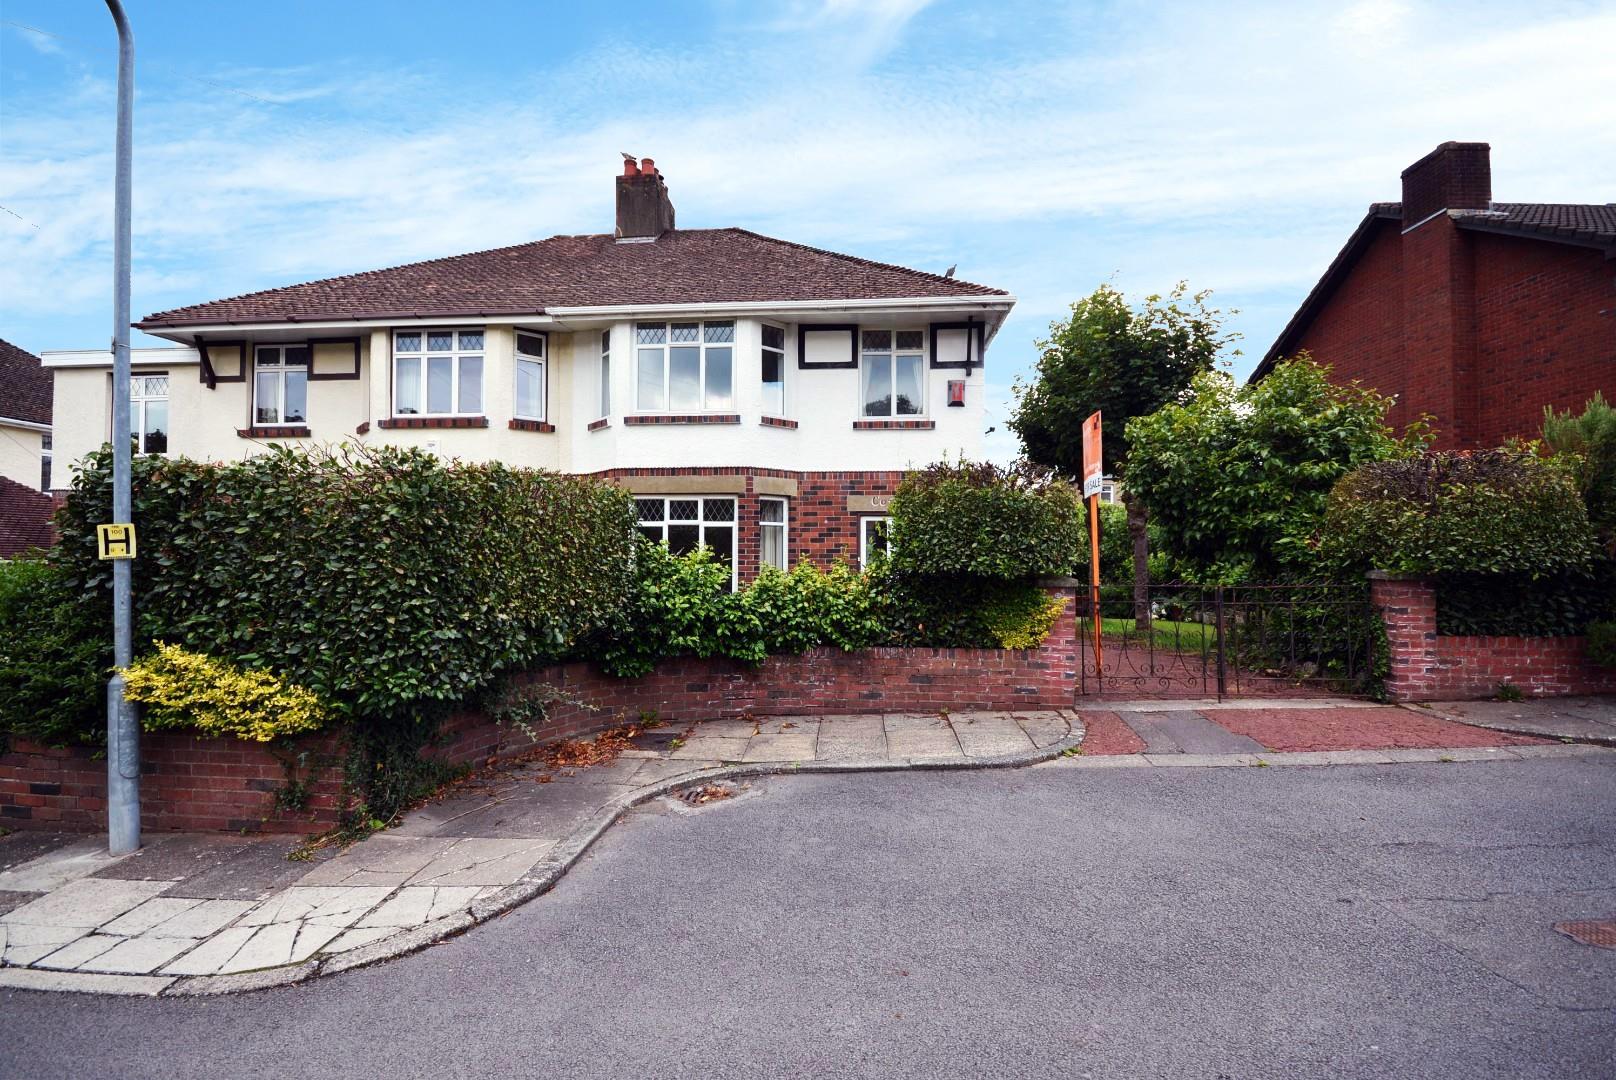 3 bed semi-detached house for sale in Nant-Fawr Crescent, Cardiff - Property Image 1